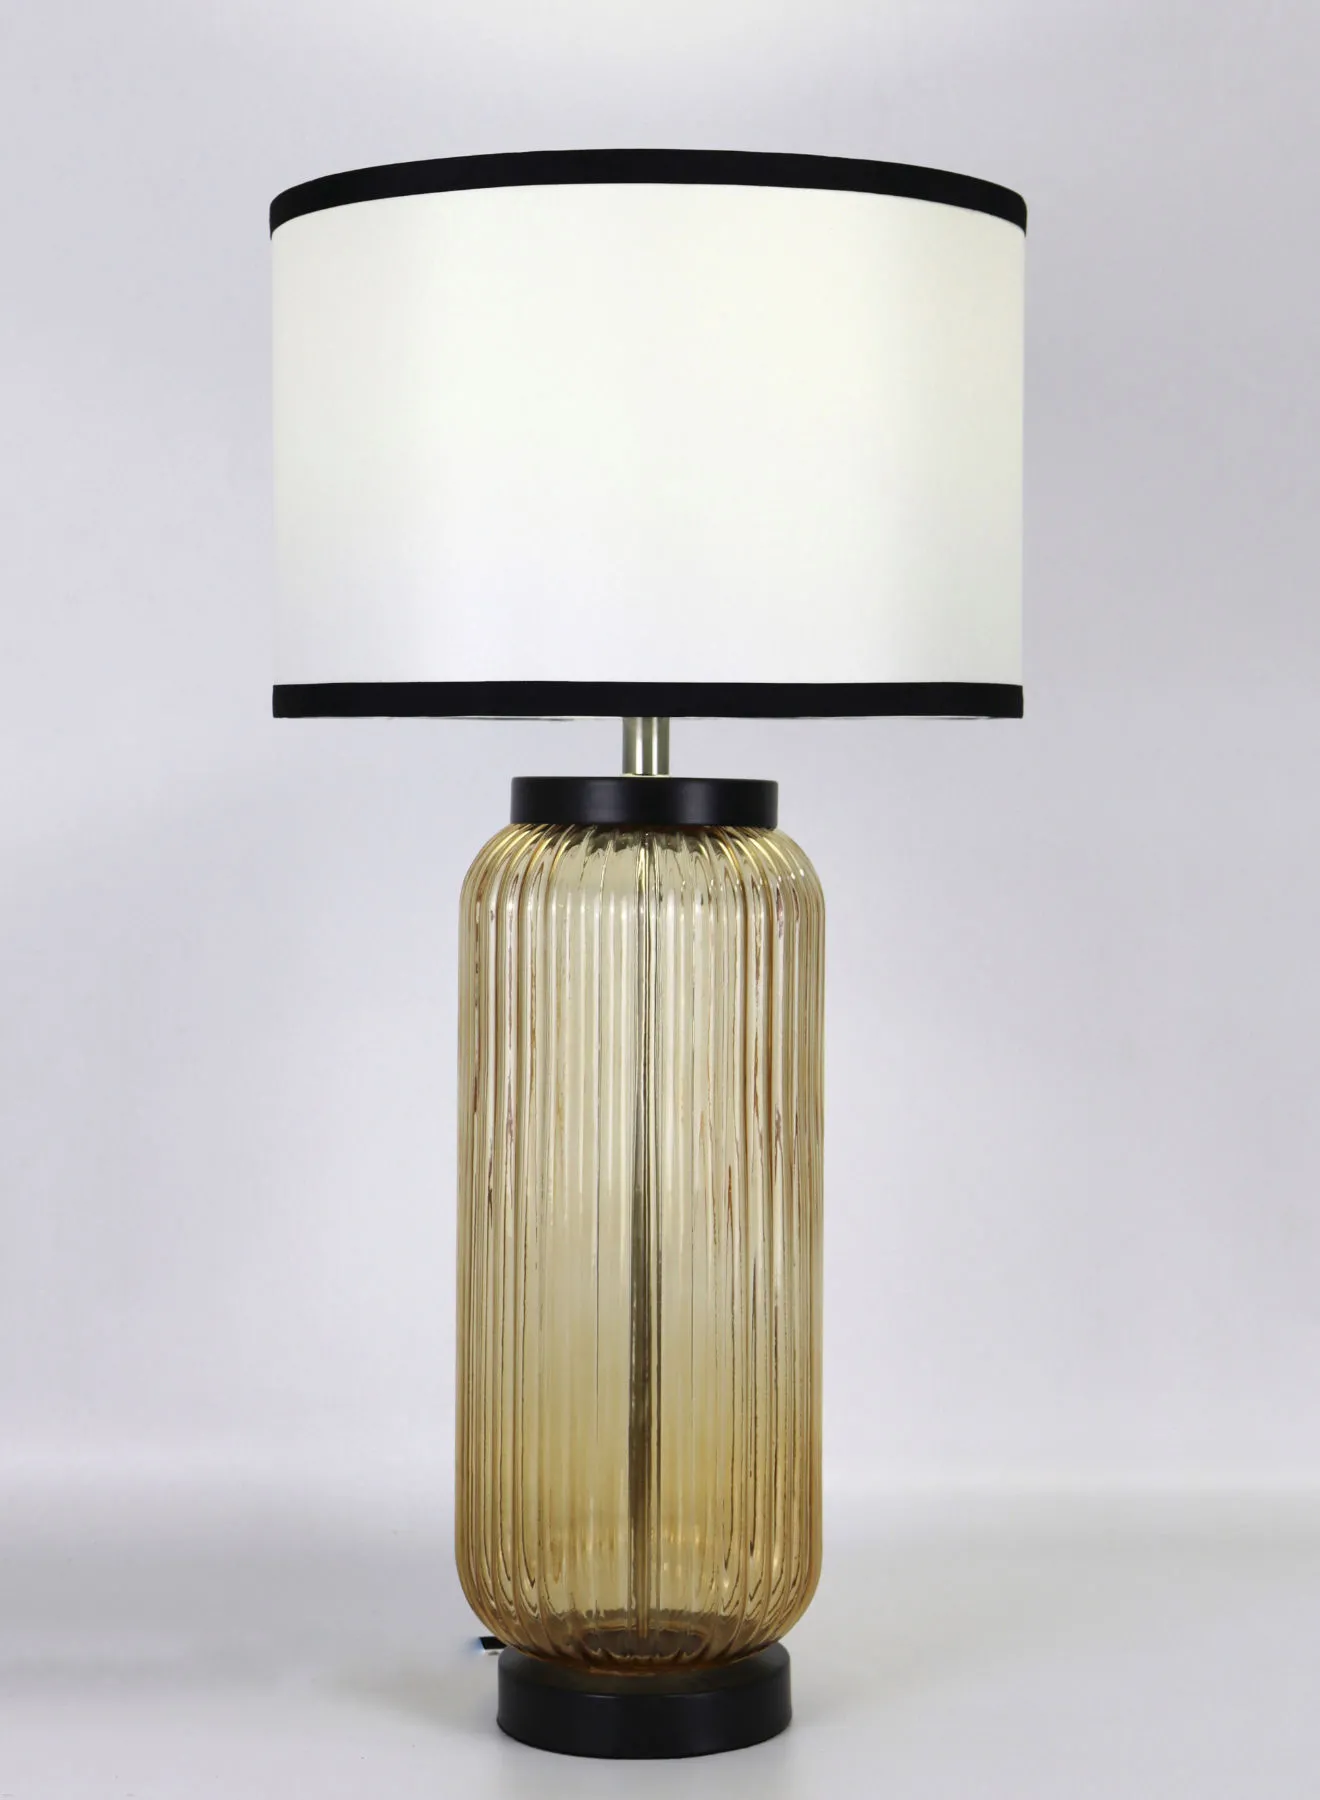 Switch Modern Design Glass Table Lamp Unique Luxury Quality Material for the Perfect Stylish Home RSN71052 Gold/Black 12 x 24.2 Gold/Black 12 x 24.2inch